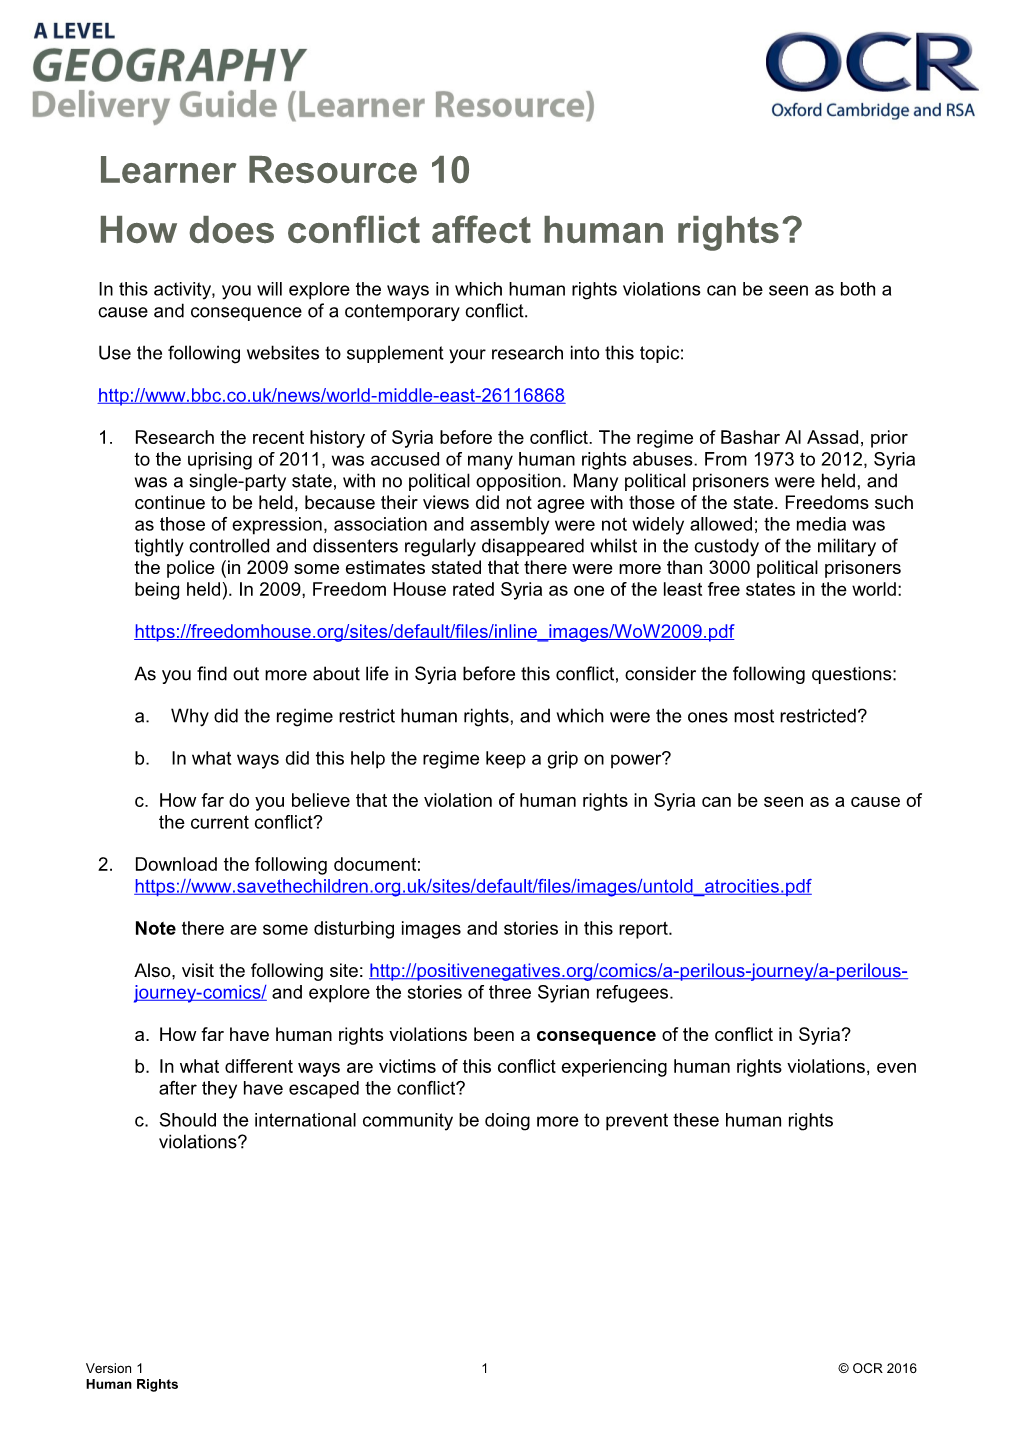 OCR a Level Geography Human Rights Learner Resource 10